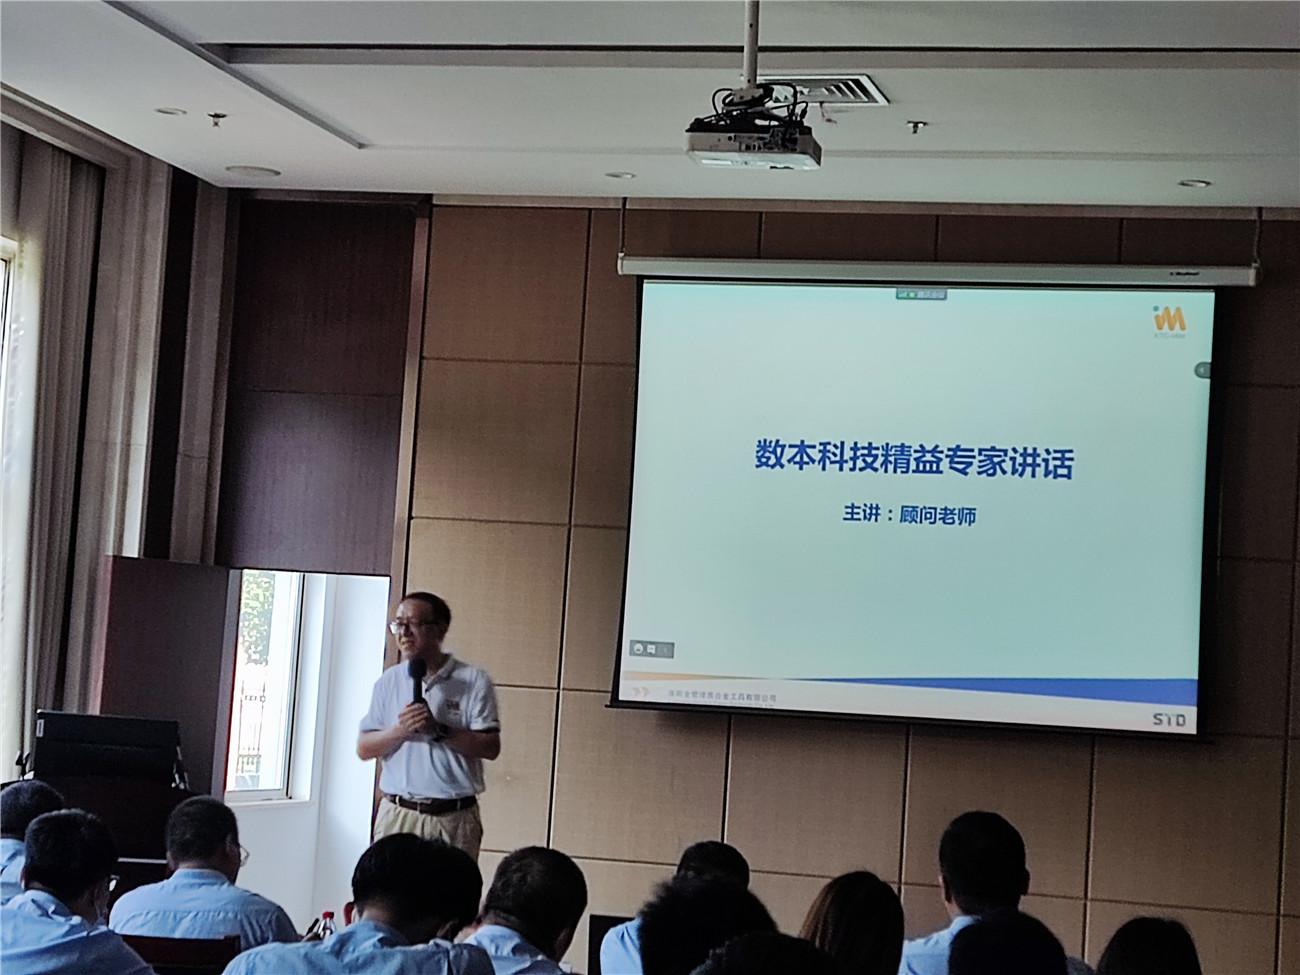 [Lean topic] Luoyang Jinlu IAM lean production project held the first phase summary and recognition and the second phase kick-off meeting